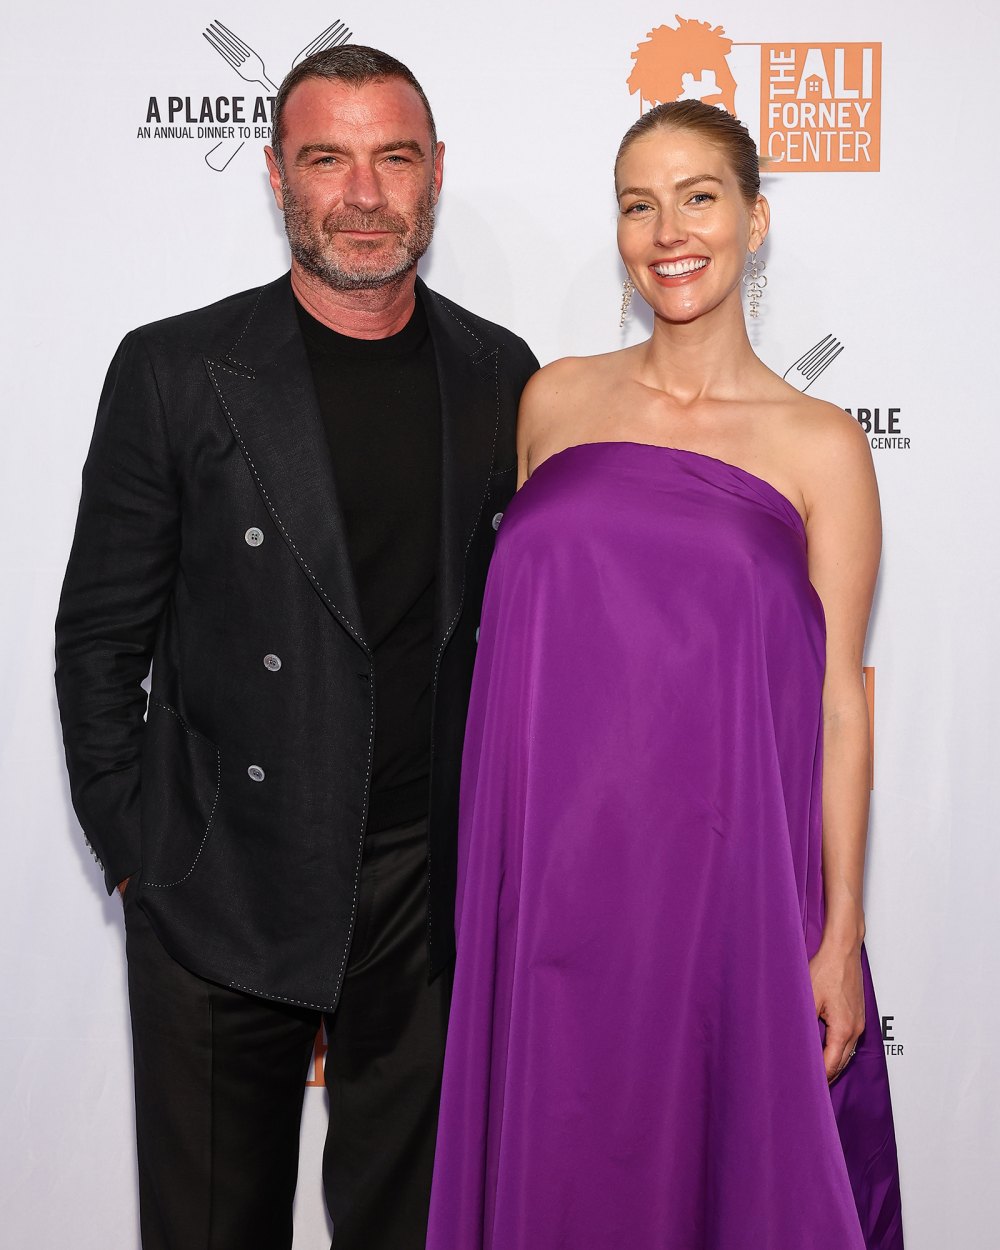 Liev Schreiber in Black Suit and Pregnant Taylor Neisen in Purple Dress Smile and Pose on Red Carpet for Ali Forney Center A Place At The Table Gala